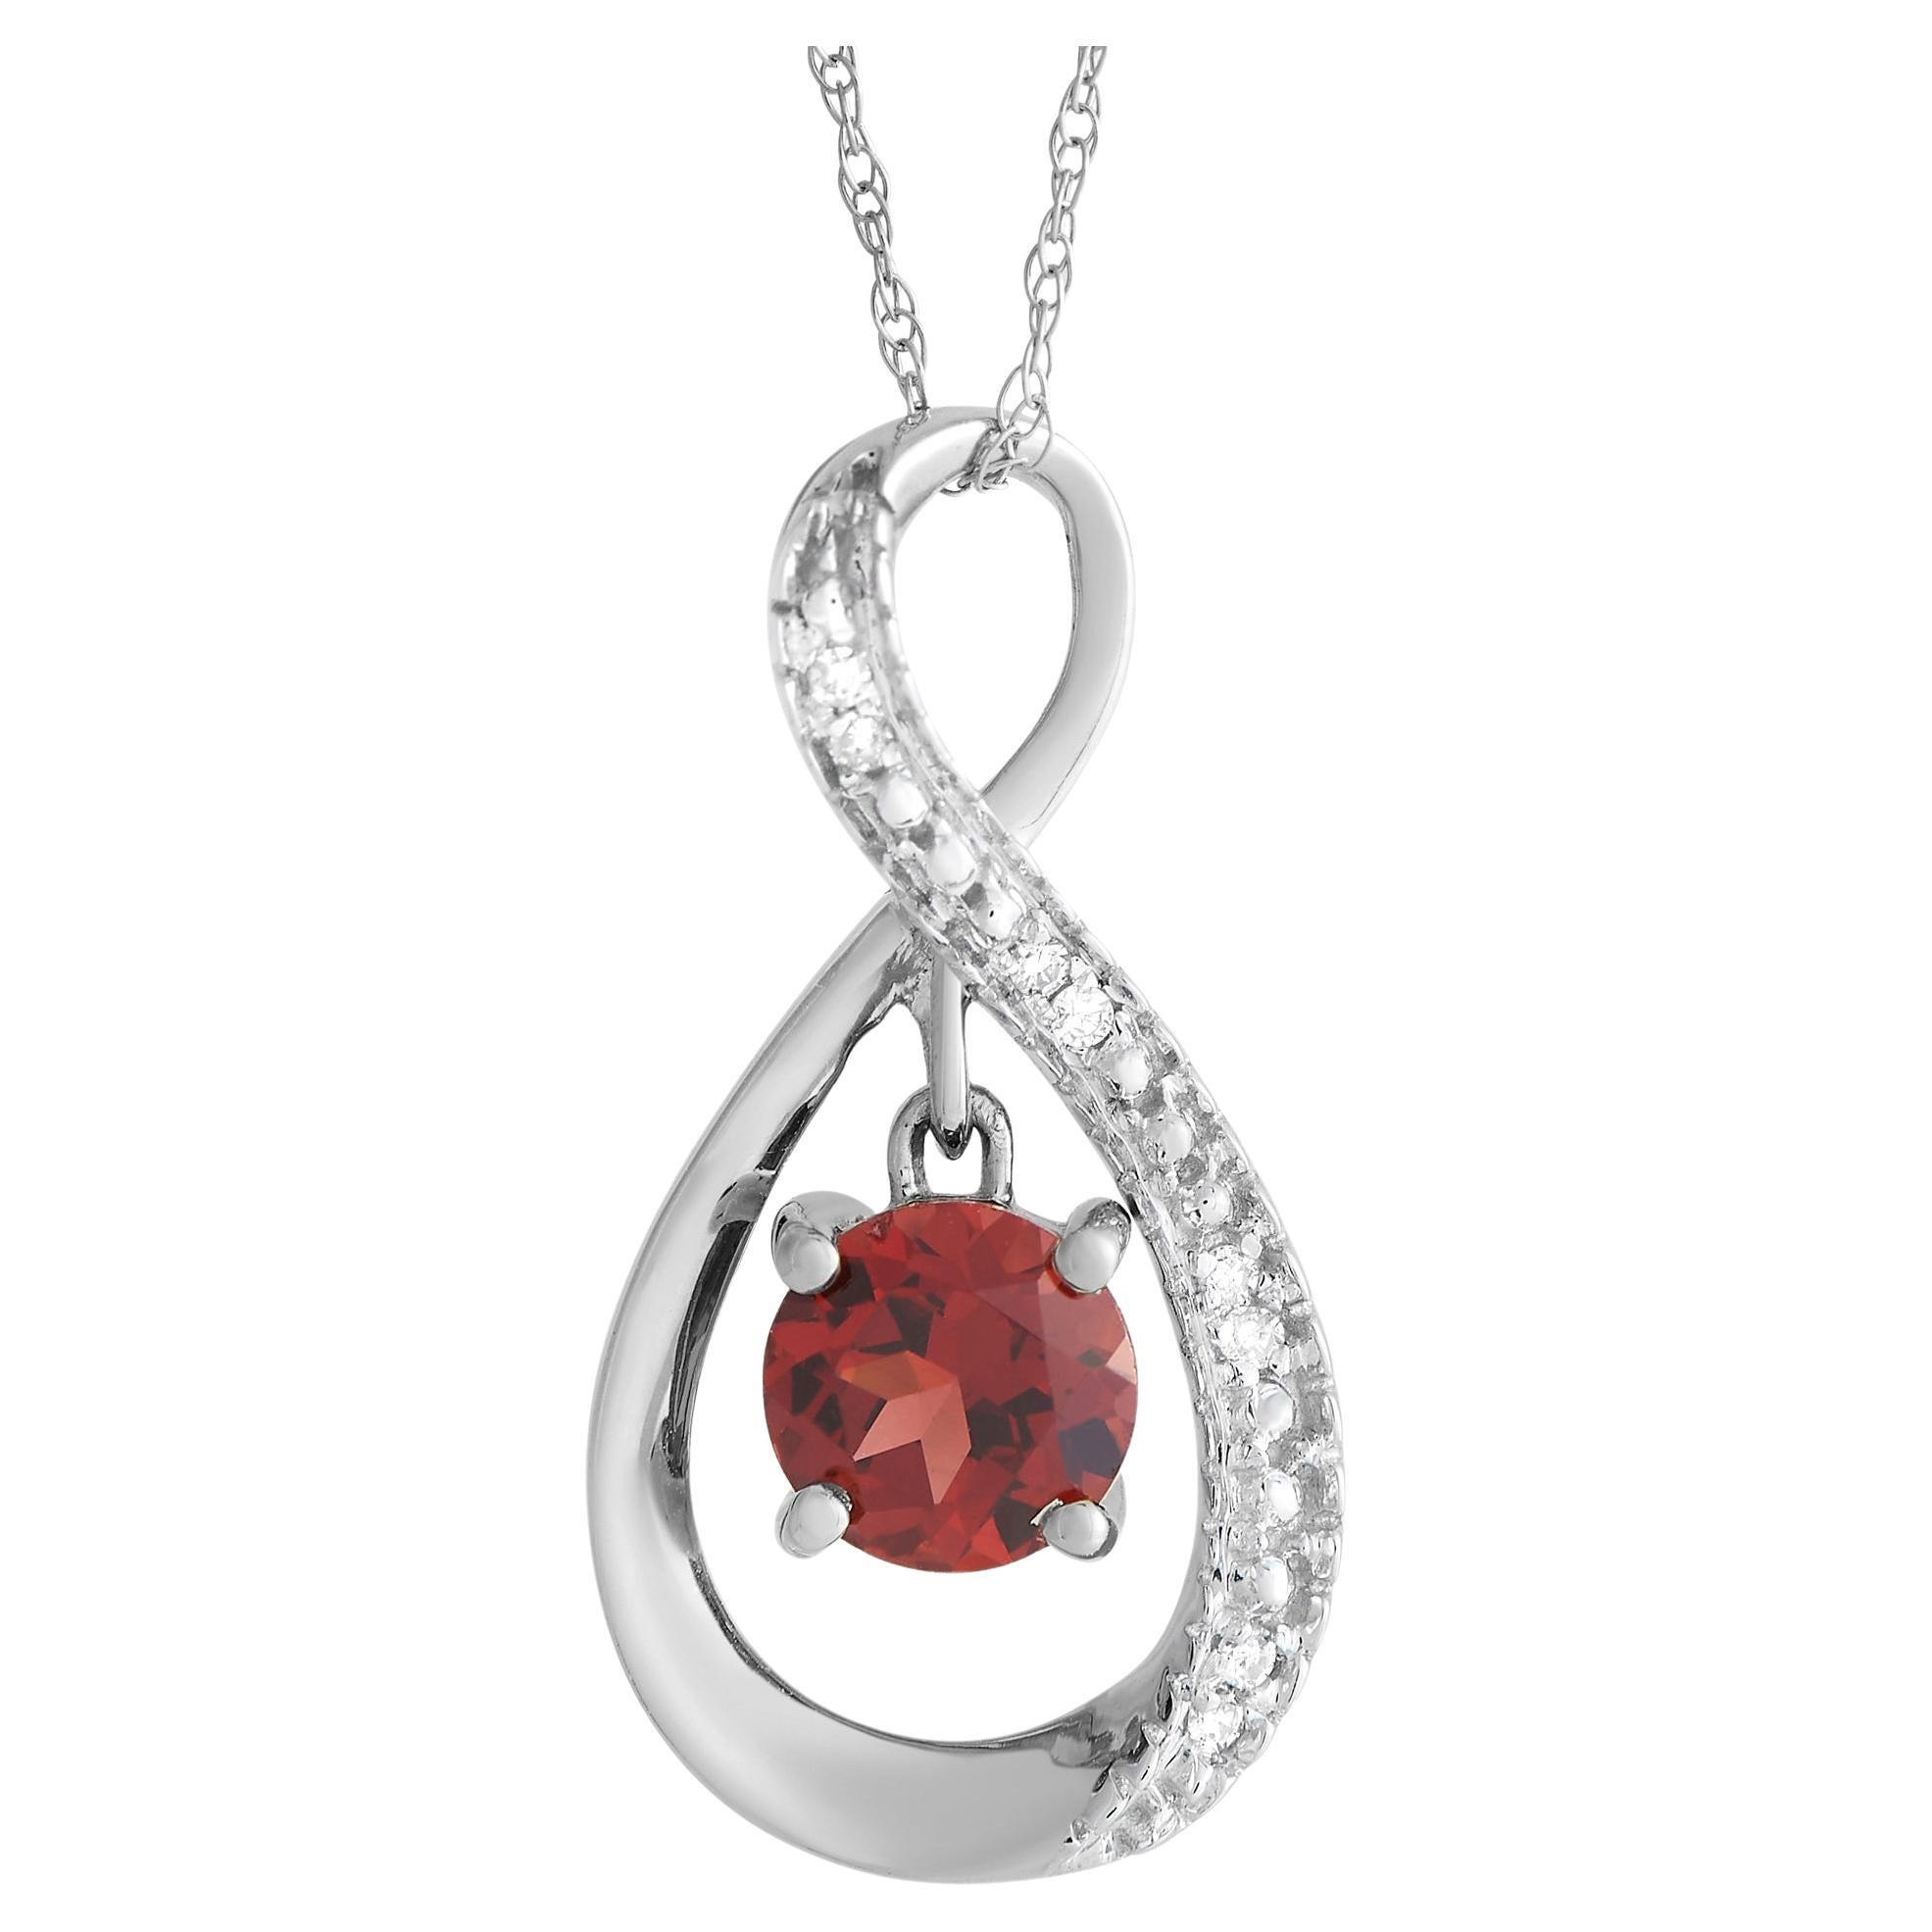 LB Exclusive 14K White Gold 0.03ct Diamond and Garnet Pendant Necklace For Sale